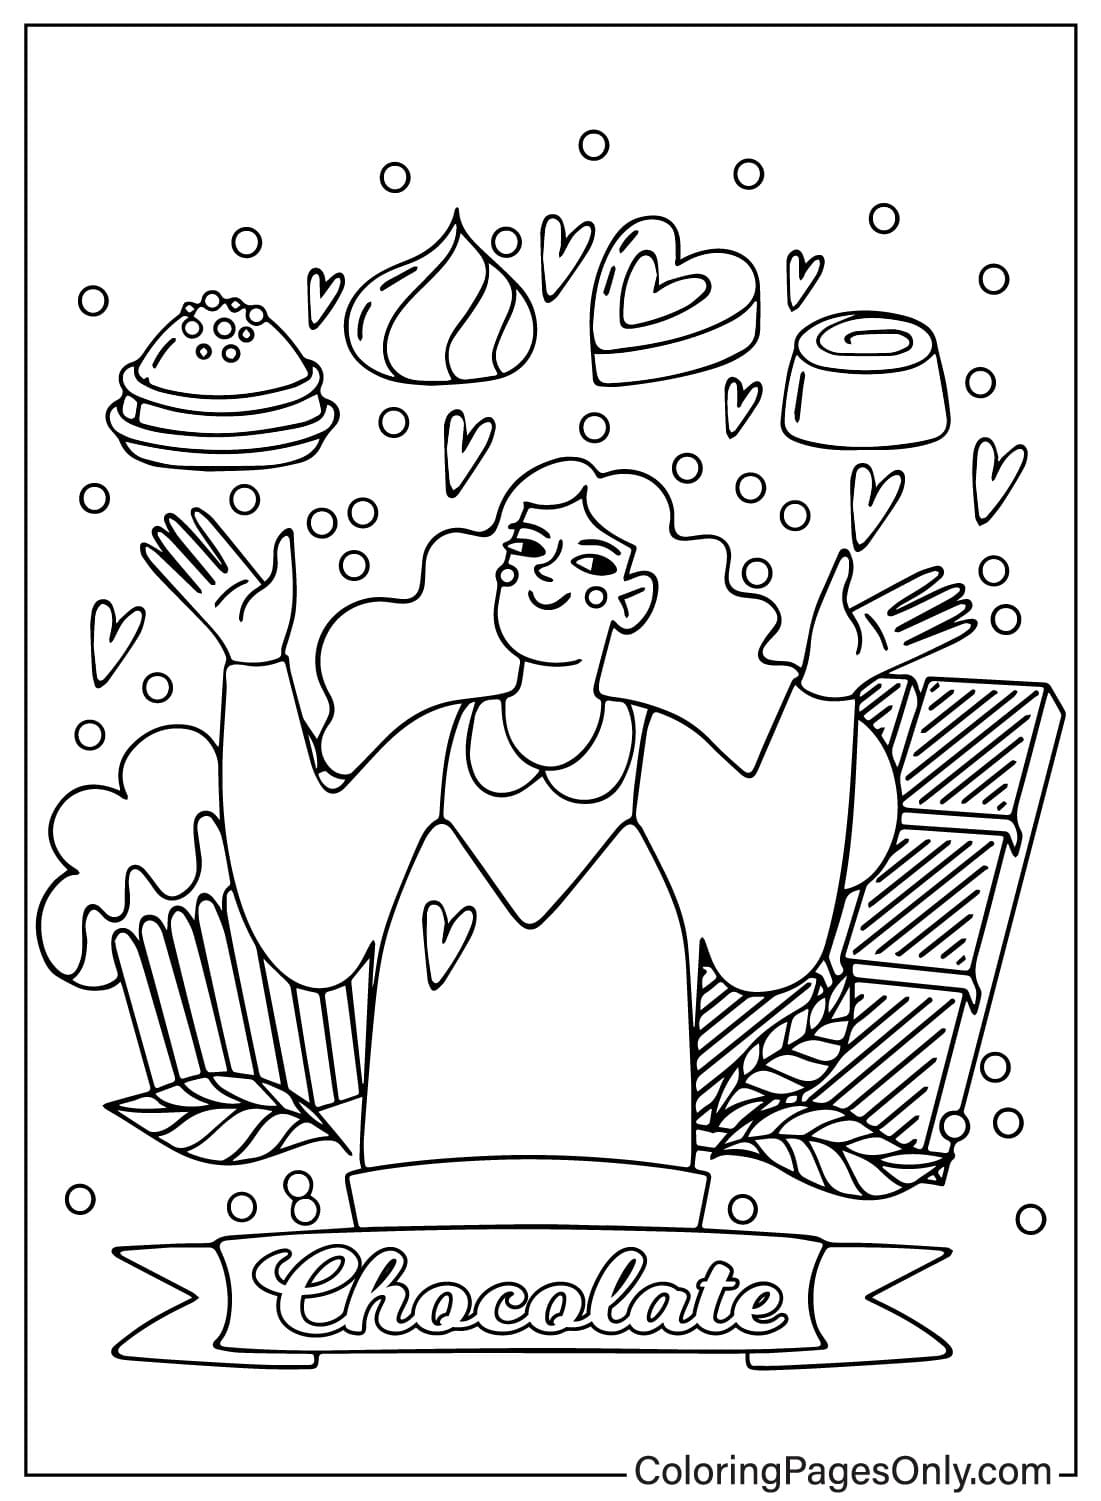 Coloring Page Chocolate from Chocolate